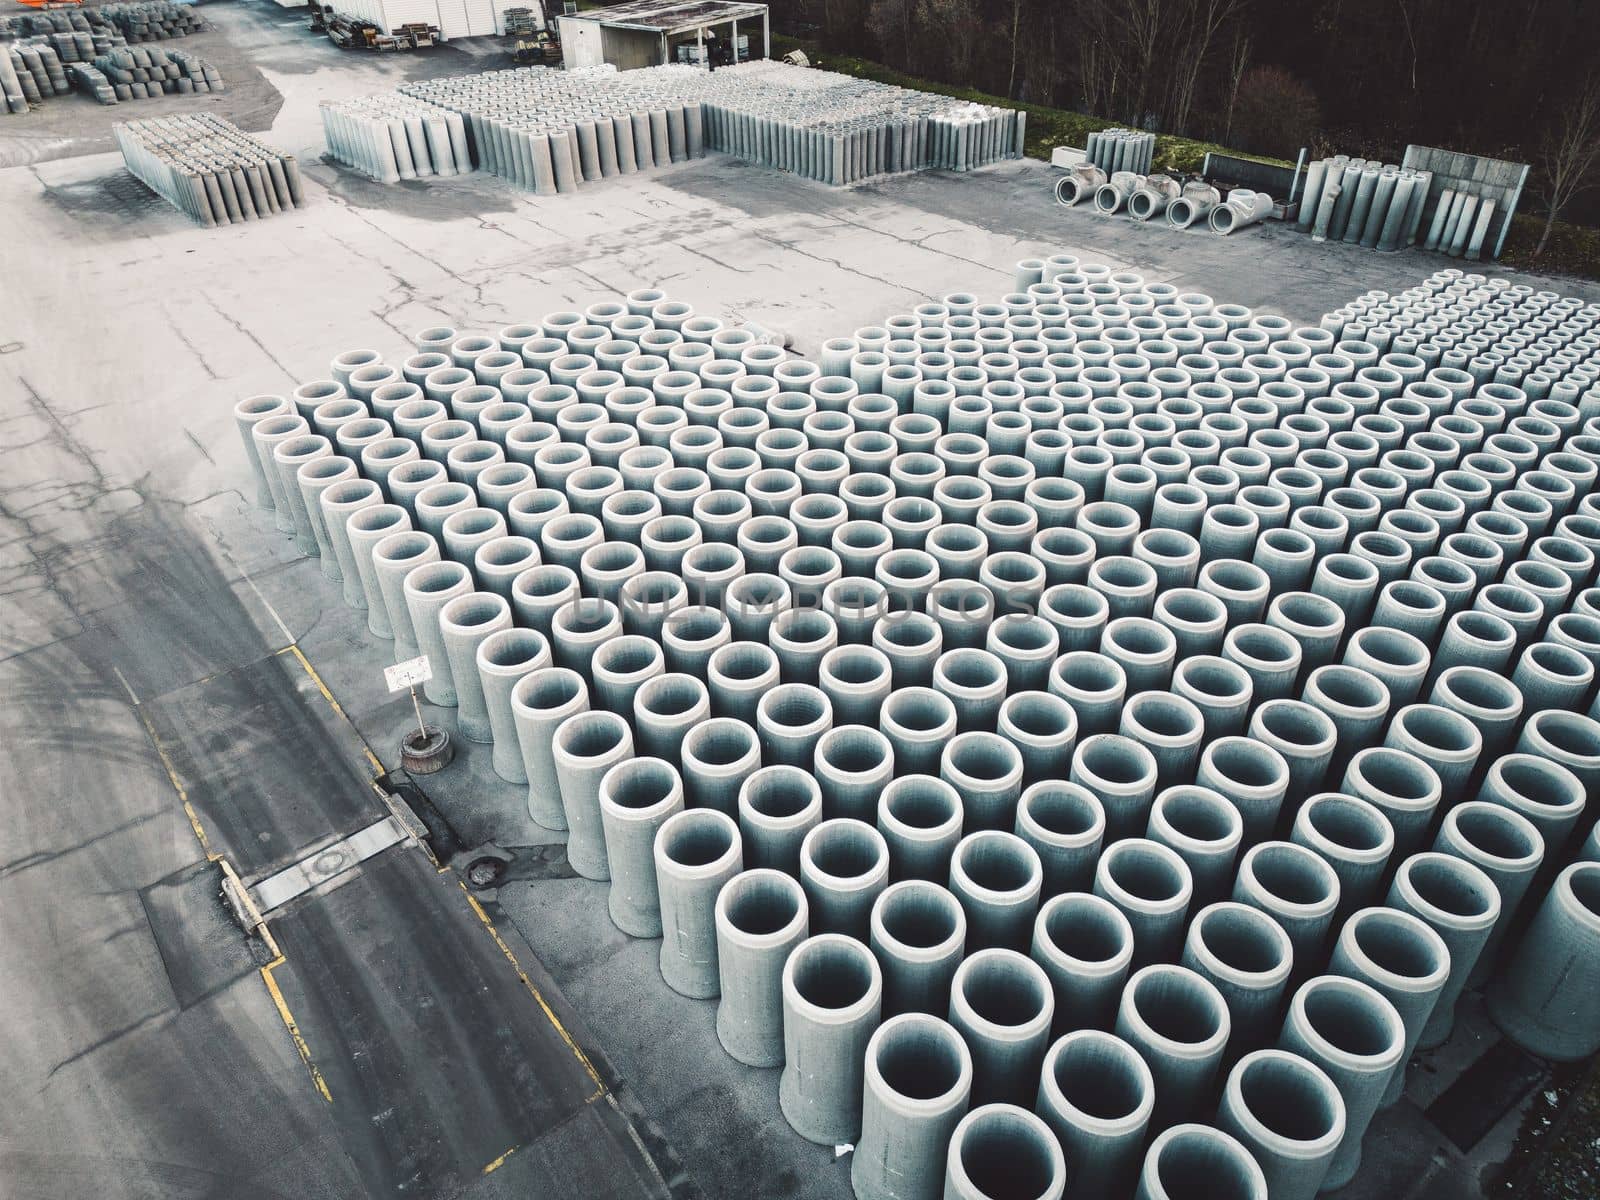 Pipe concrete manholes are stored on the ground ready for construction, for draining storm water, industrial background. High quality photo